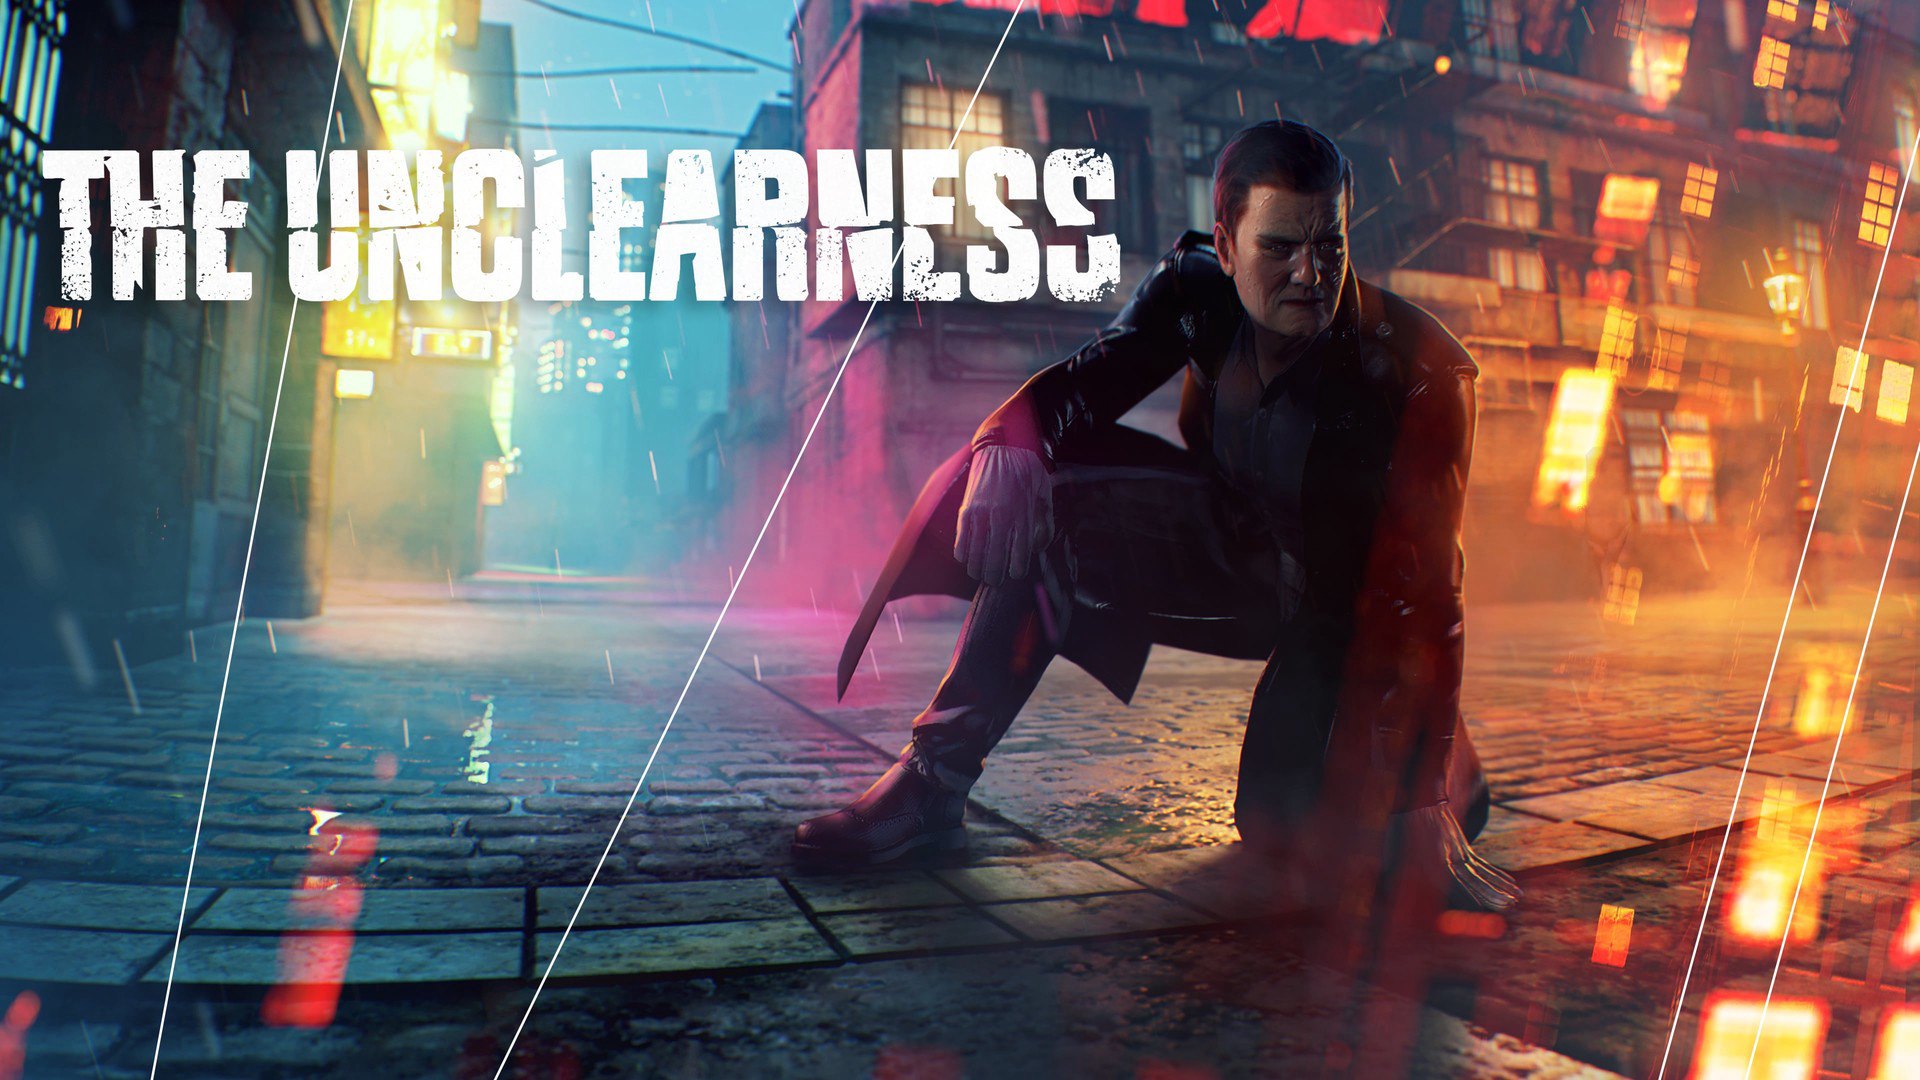 THE UNCLEARNESS Steam CD Key [$ 6.77]